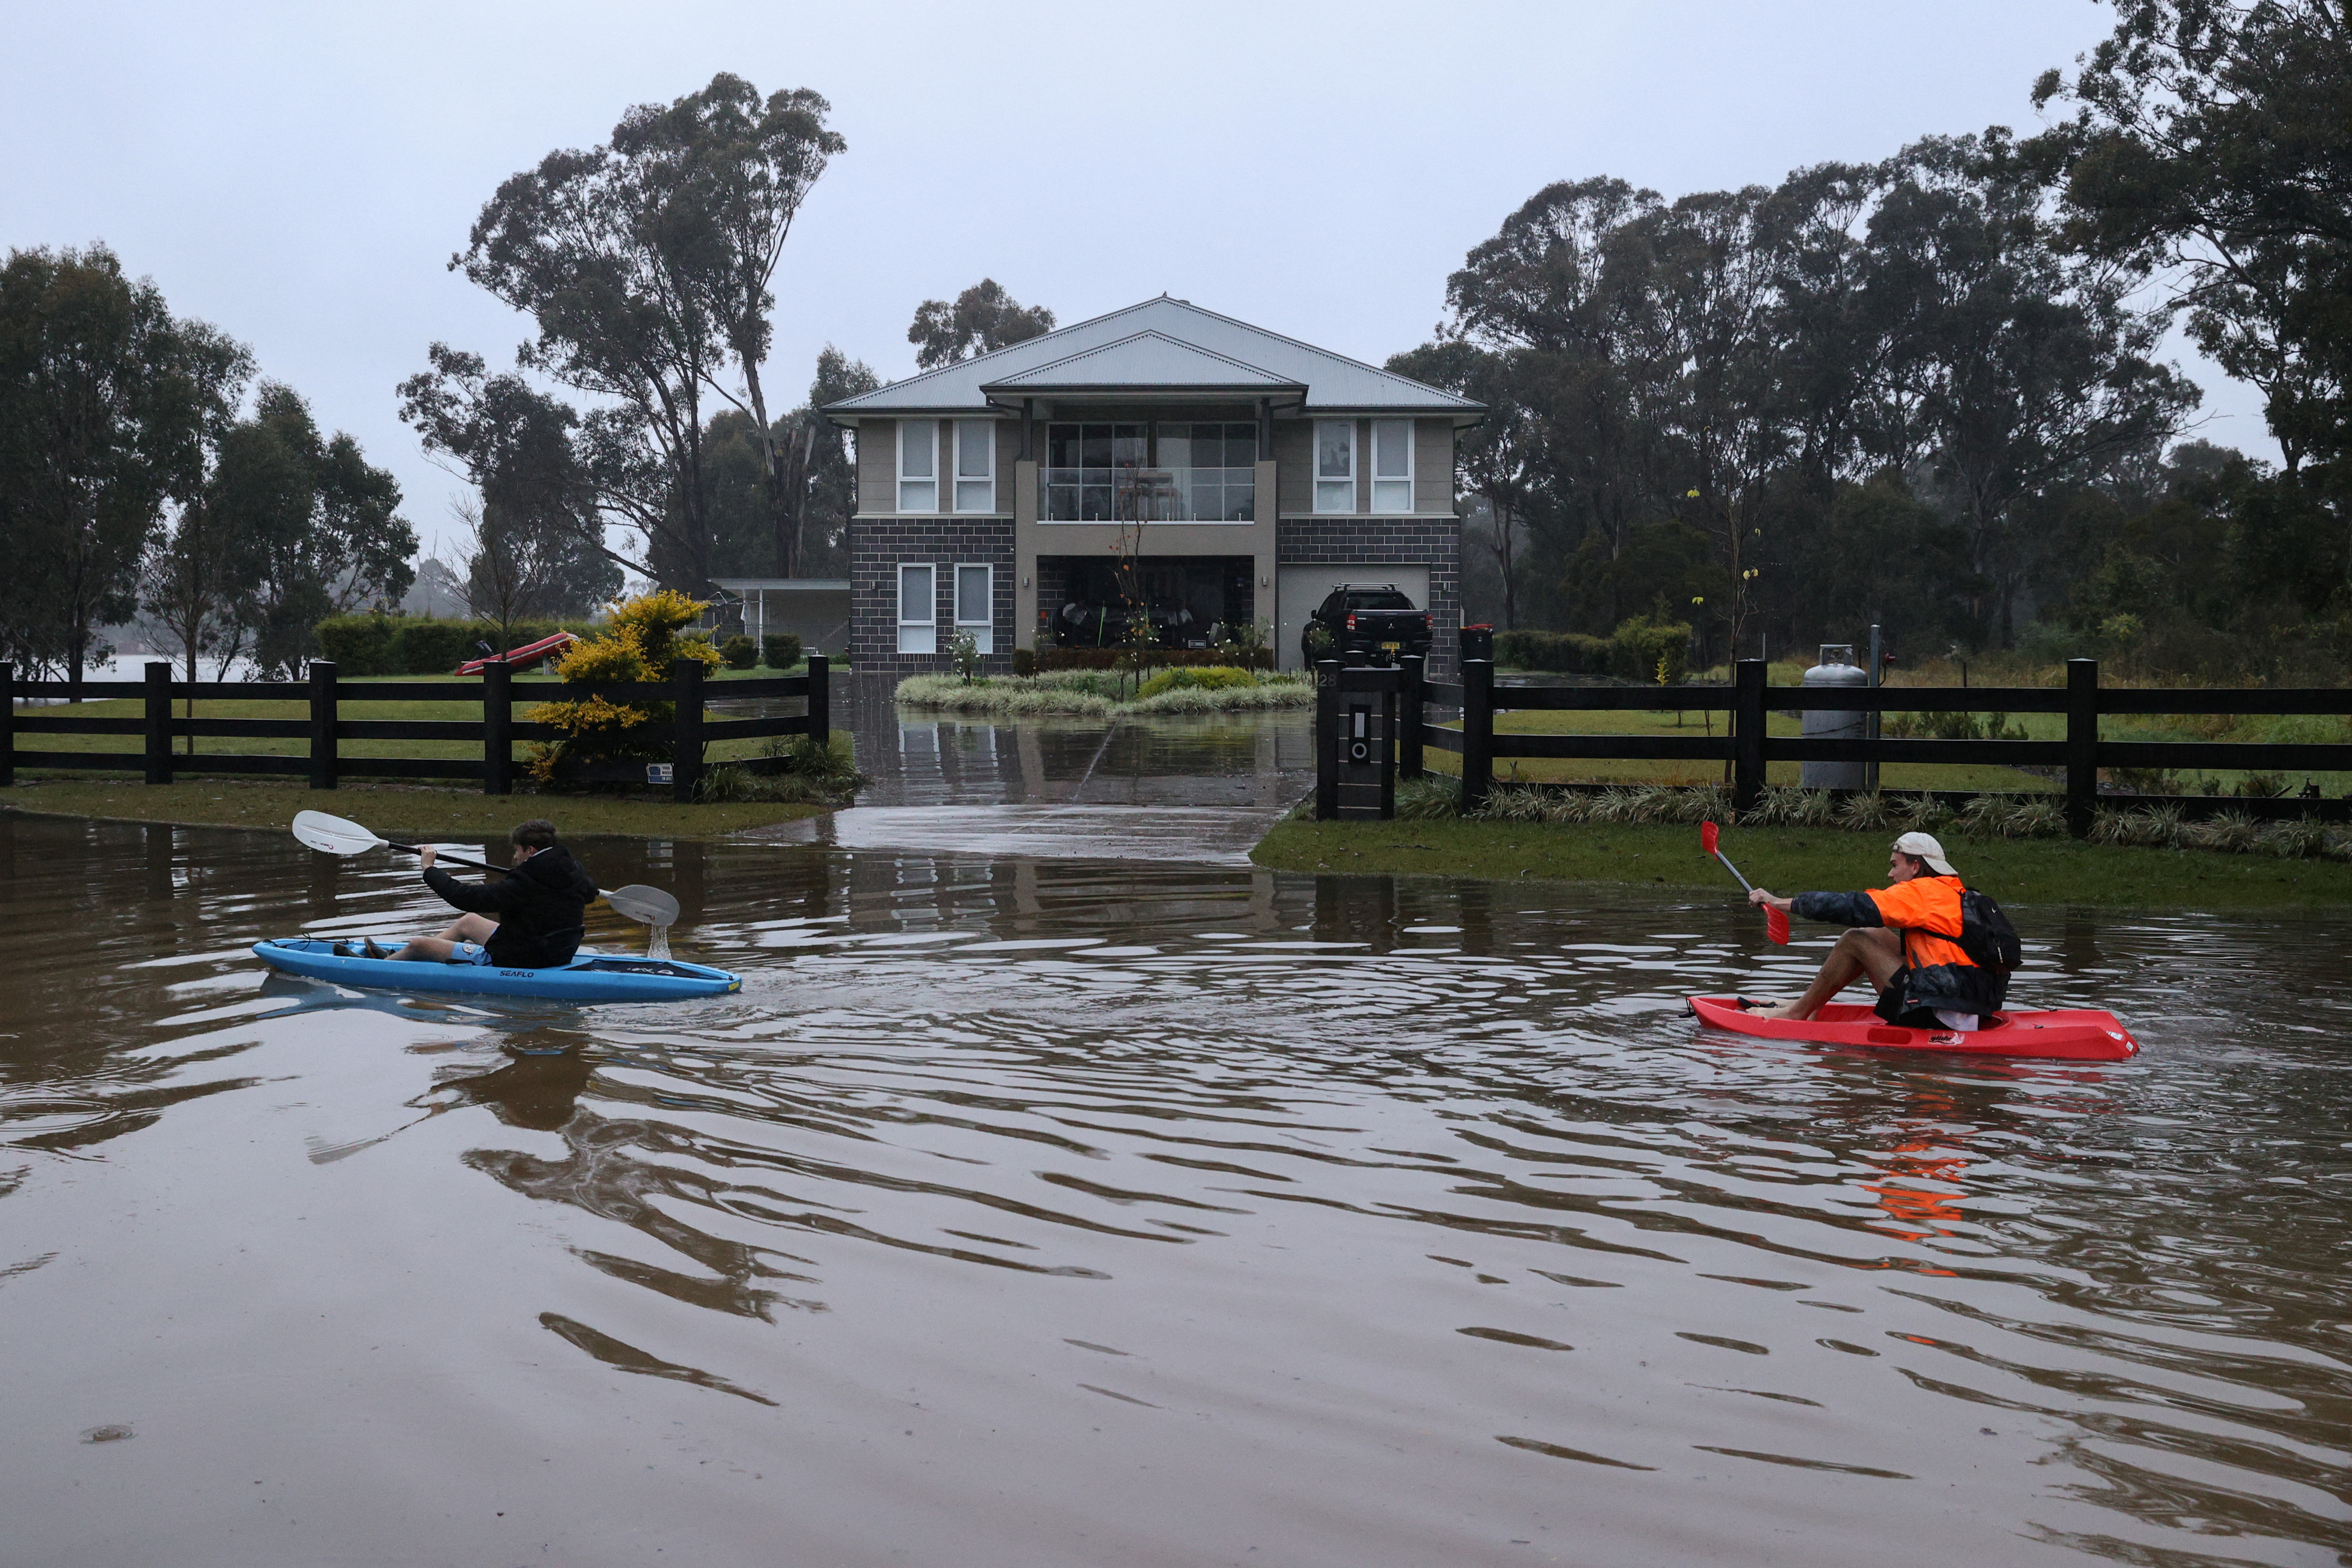 Flooding from heavy rains affects western suburbs in Sydney